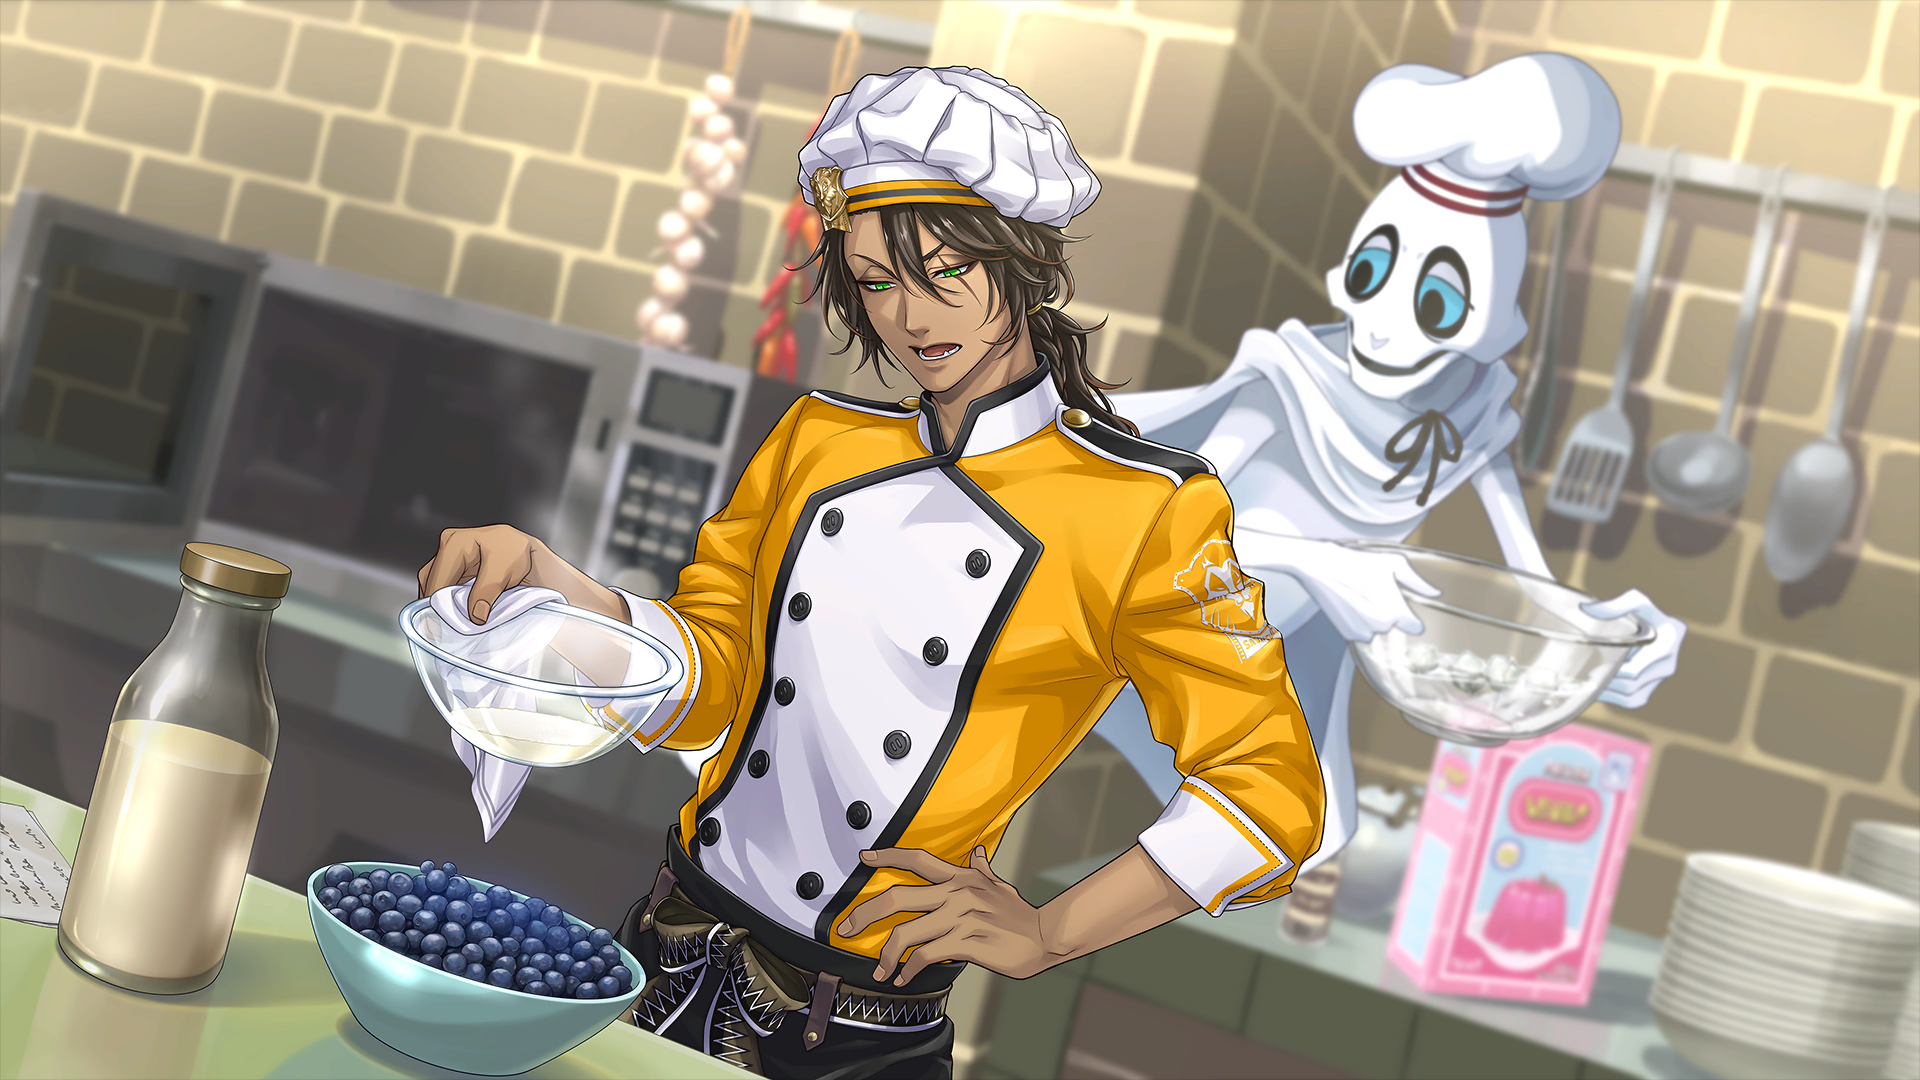 https://static.wikia.nocookie.net/twisted-wonderland/images/6/64/Card_Leona_SR_Apprentice_Chef_Groovy.png/revision/latest/scale-to-width-down/1920?cb=20230916200339